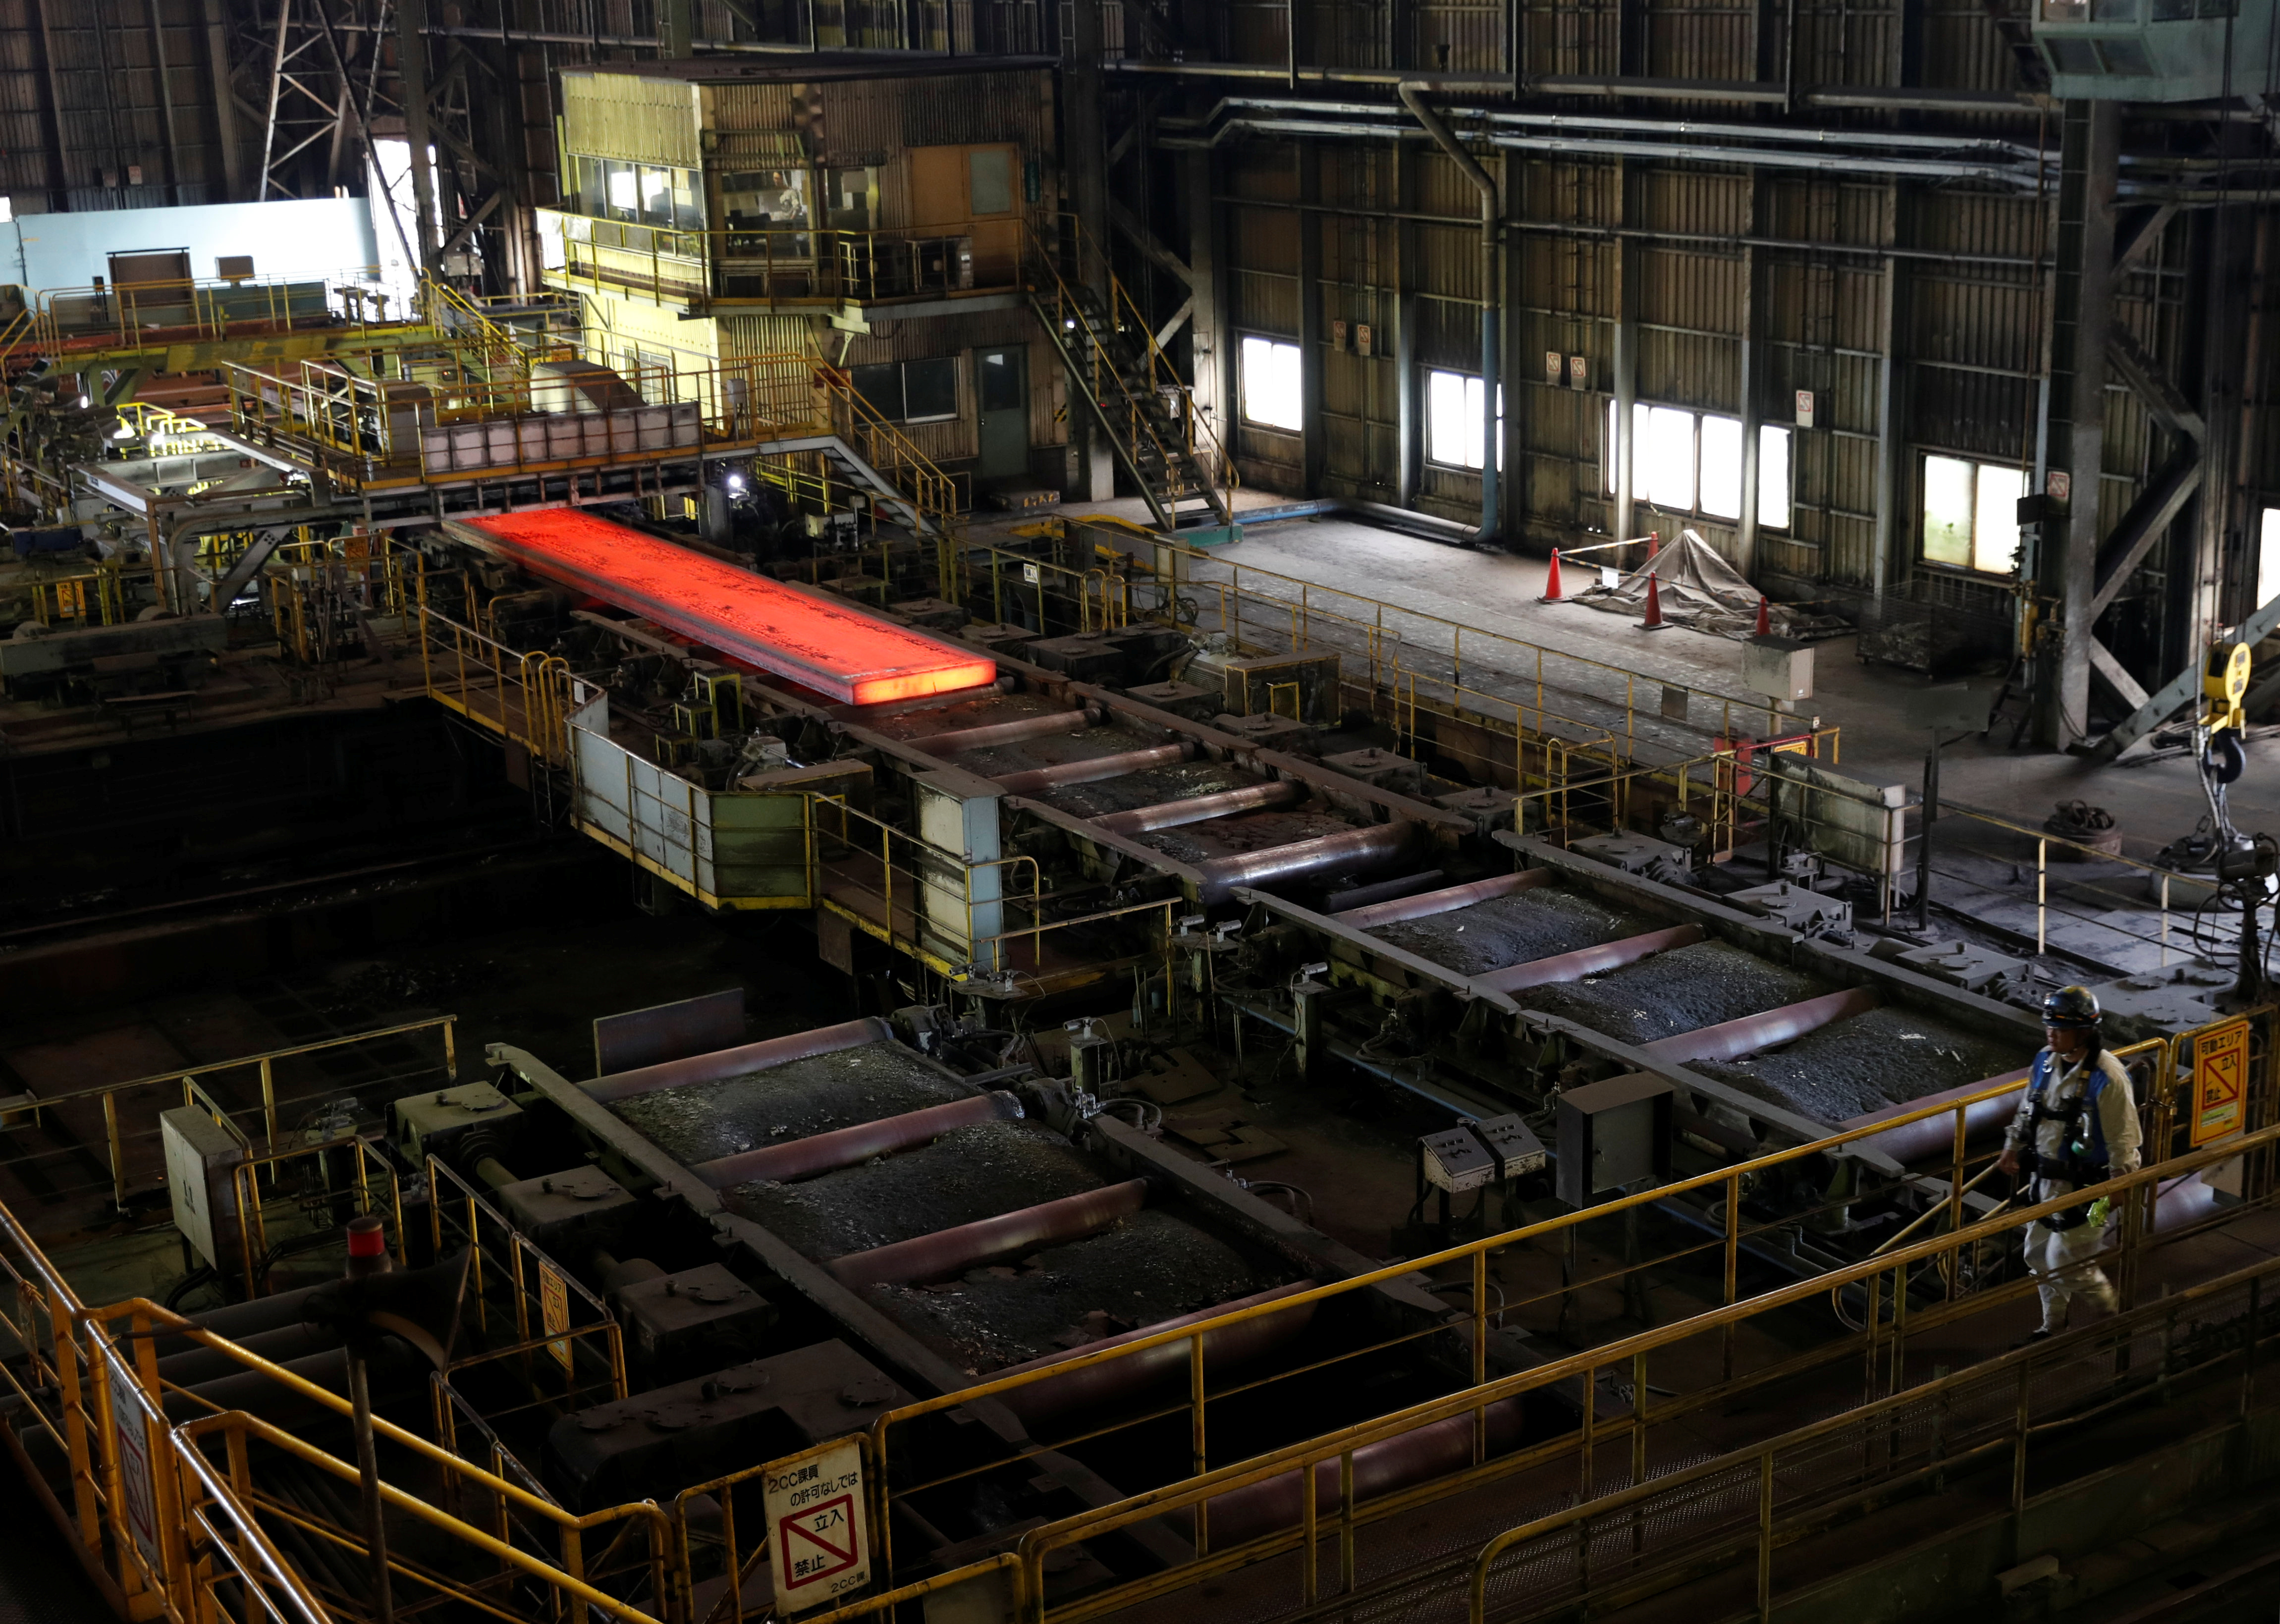 A production line of Nippon Steel & Sumitomo Metal Corp.'s Kimitsu steel plant is pictured in Kimitsu